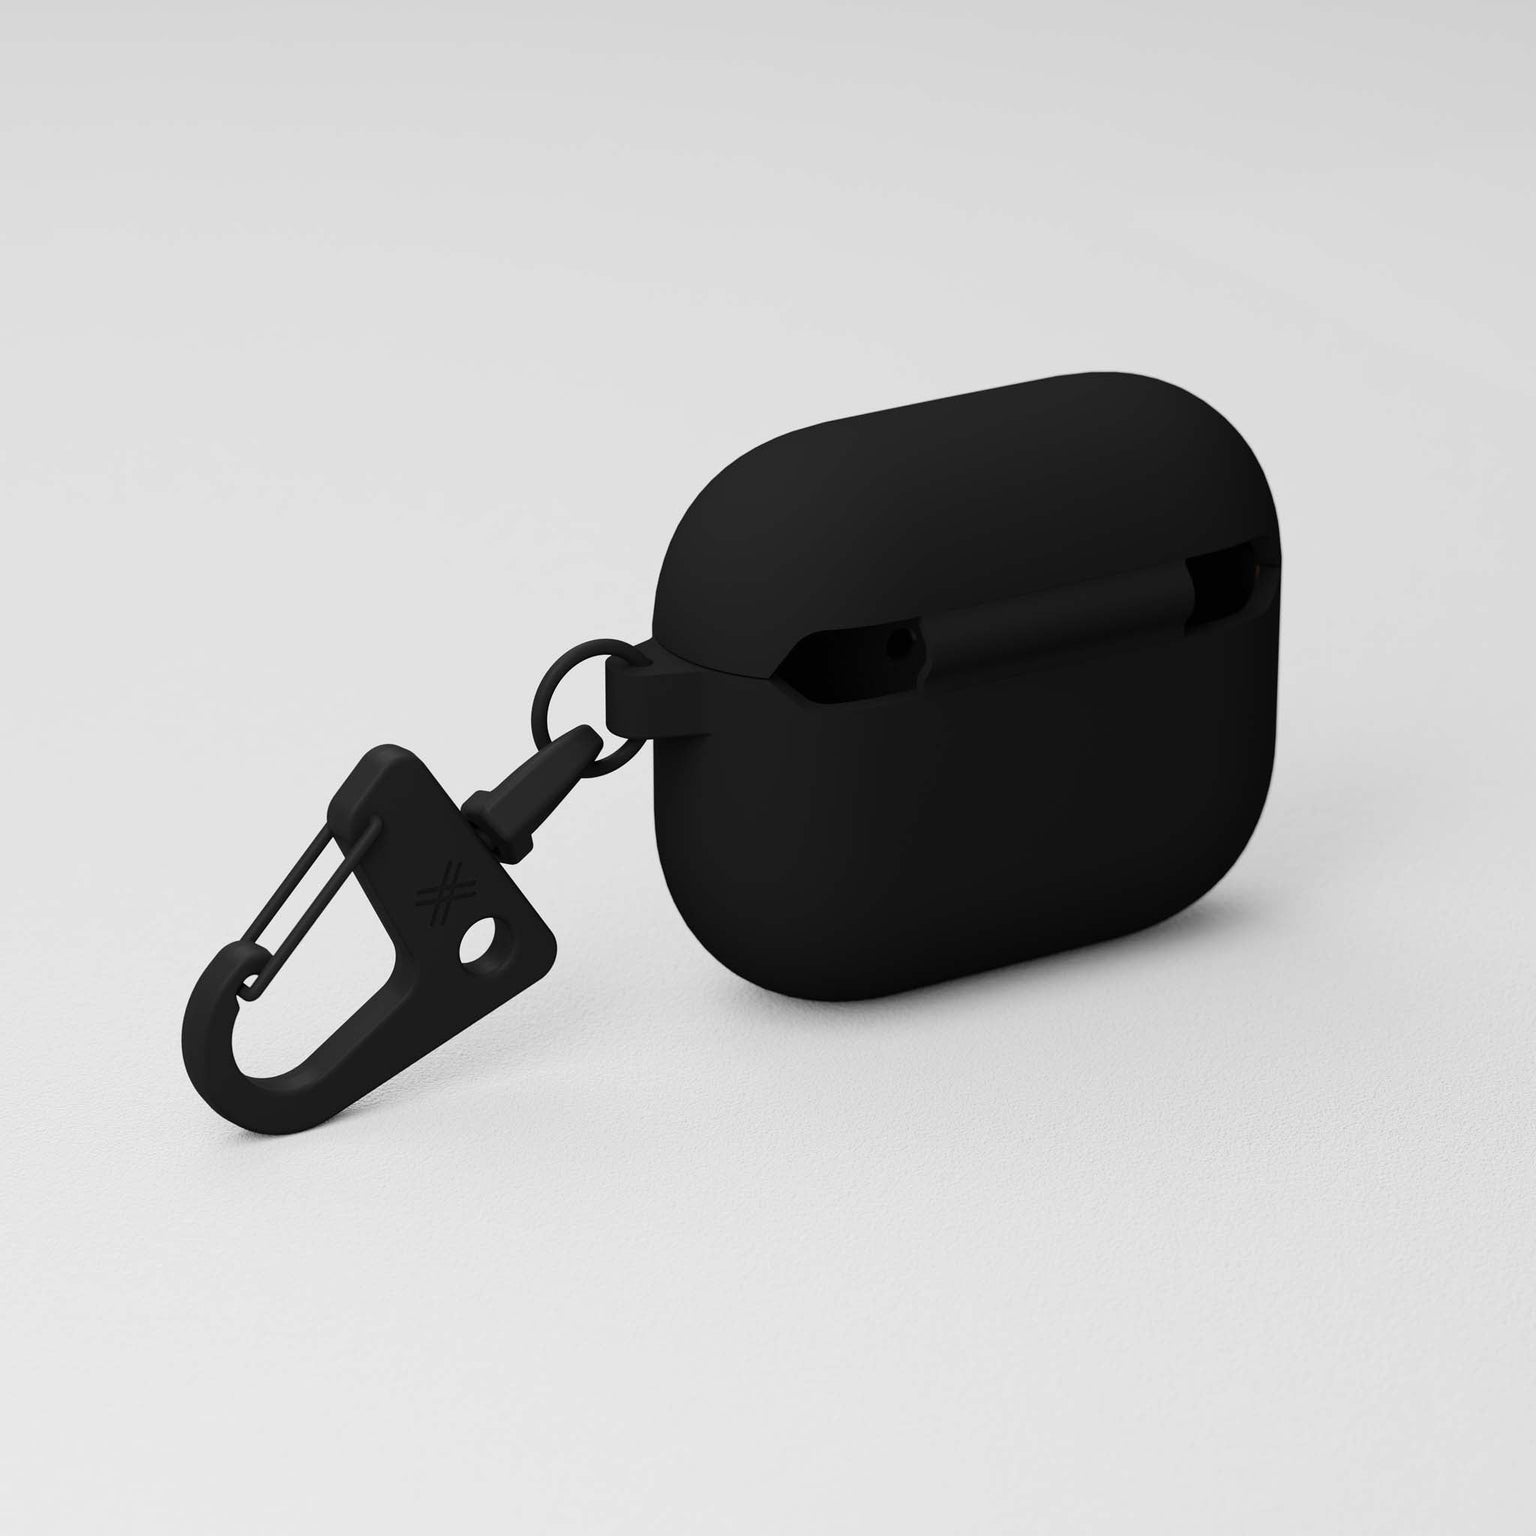 Apple AirPods case 3rd generation in Black silicone with black metal carabiner hook | XOUXOU